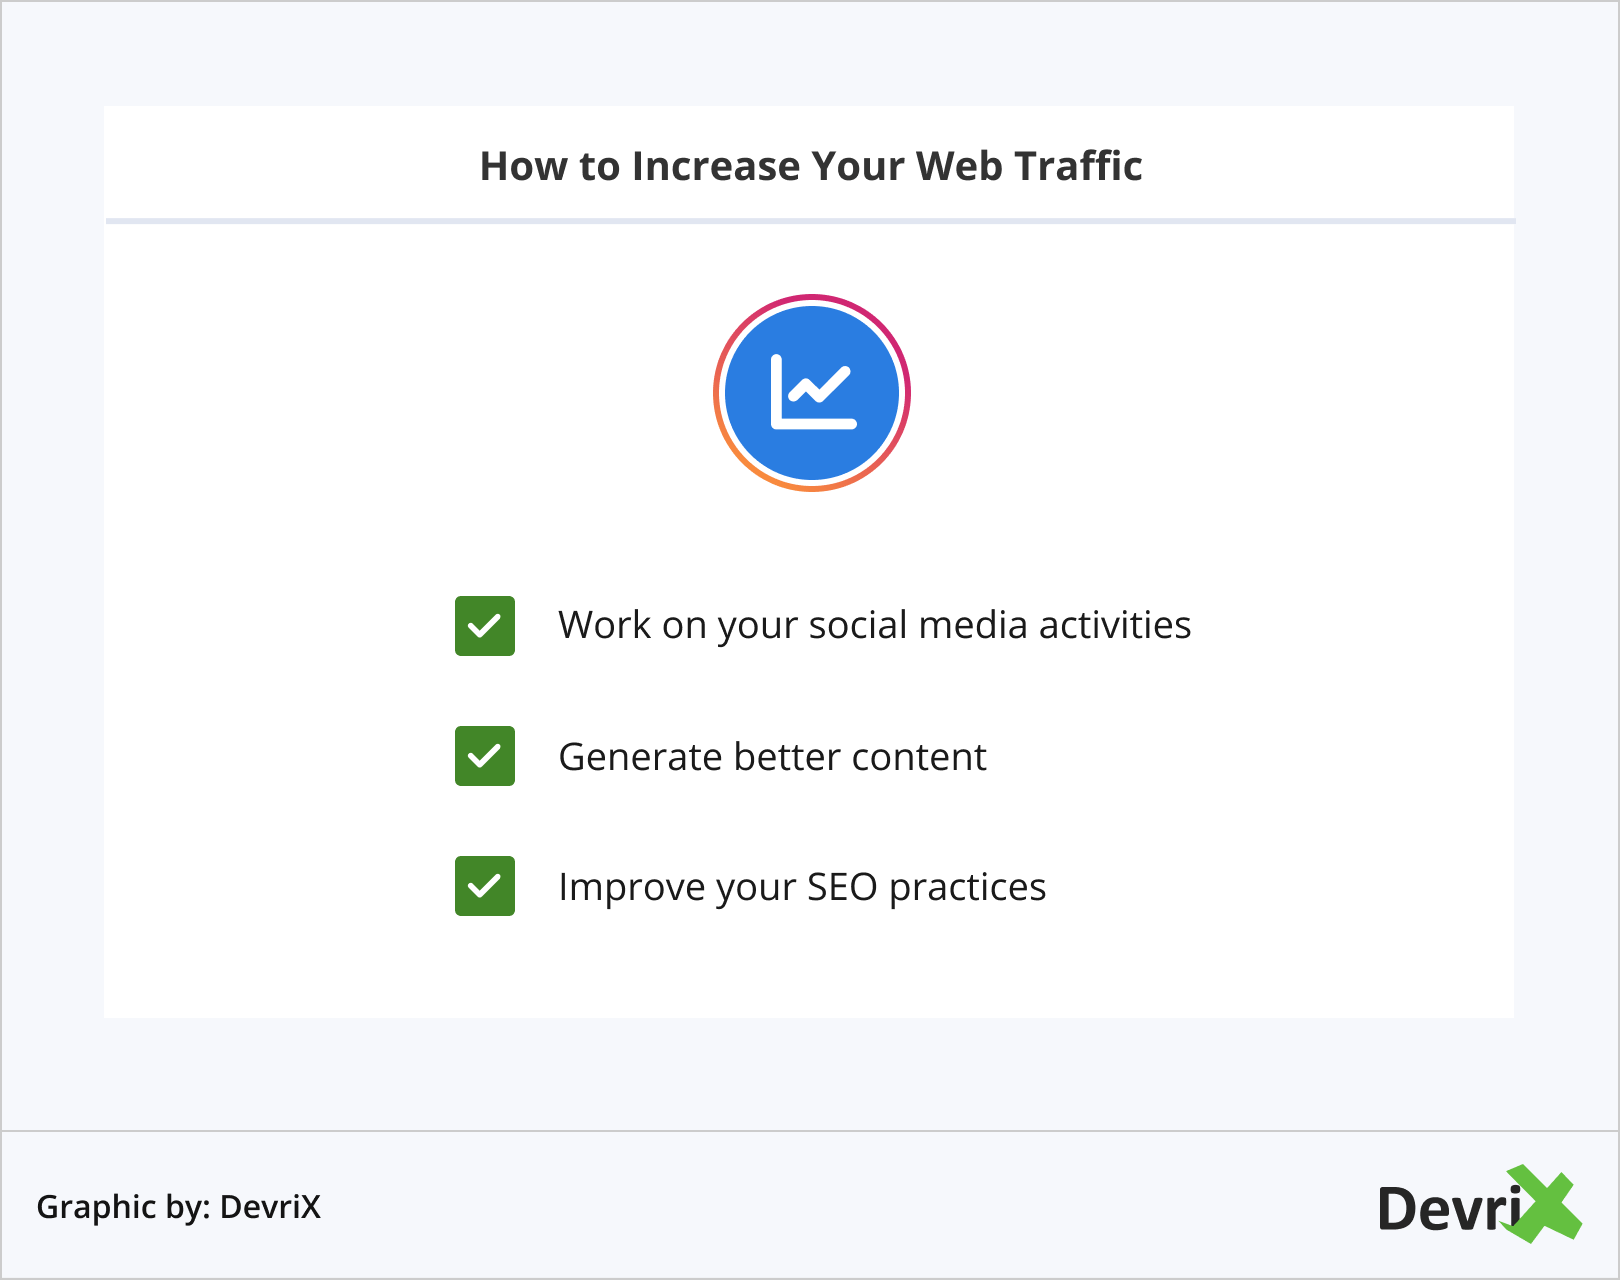 How to Increase Your Web Traffic